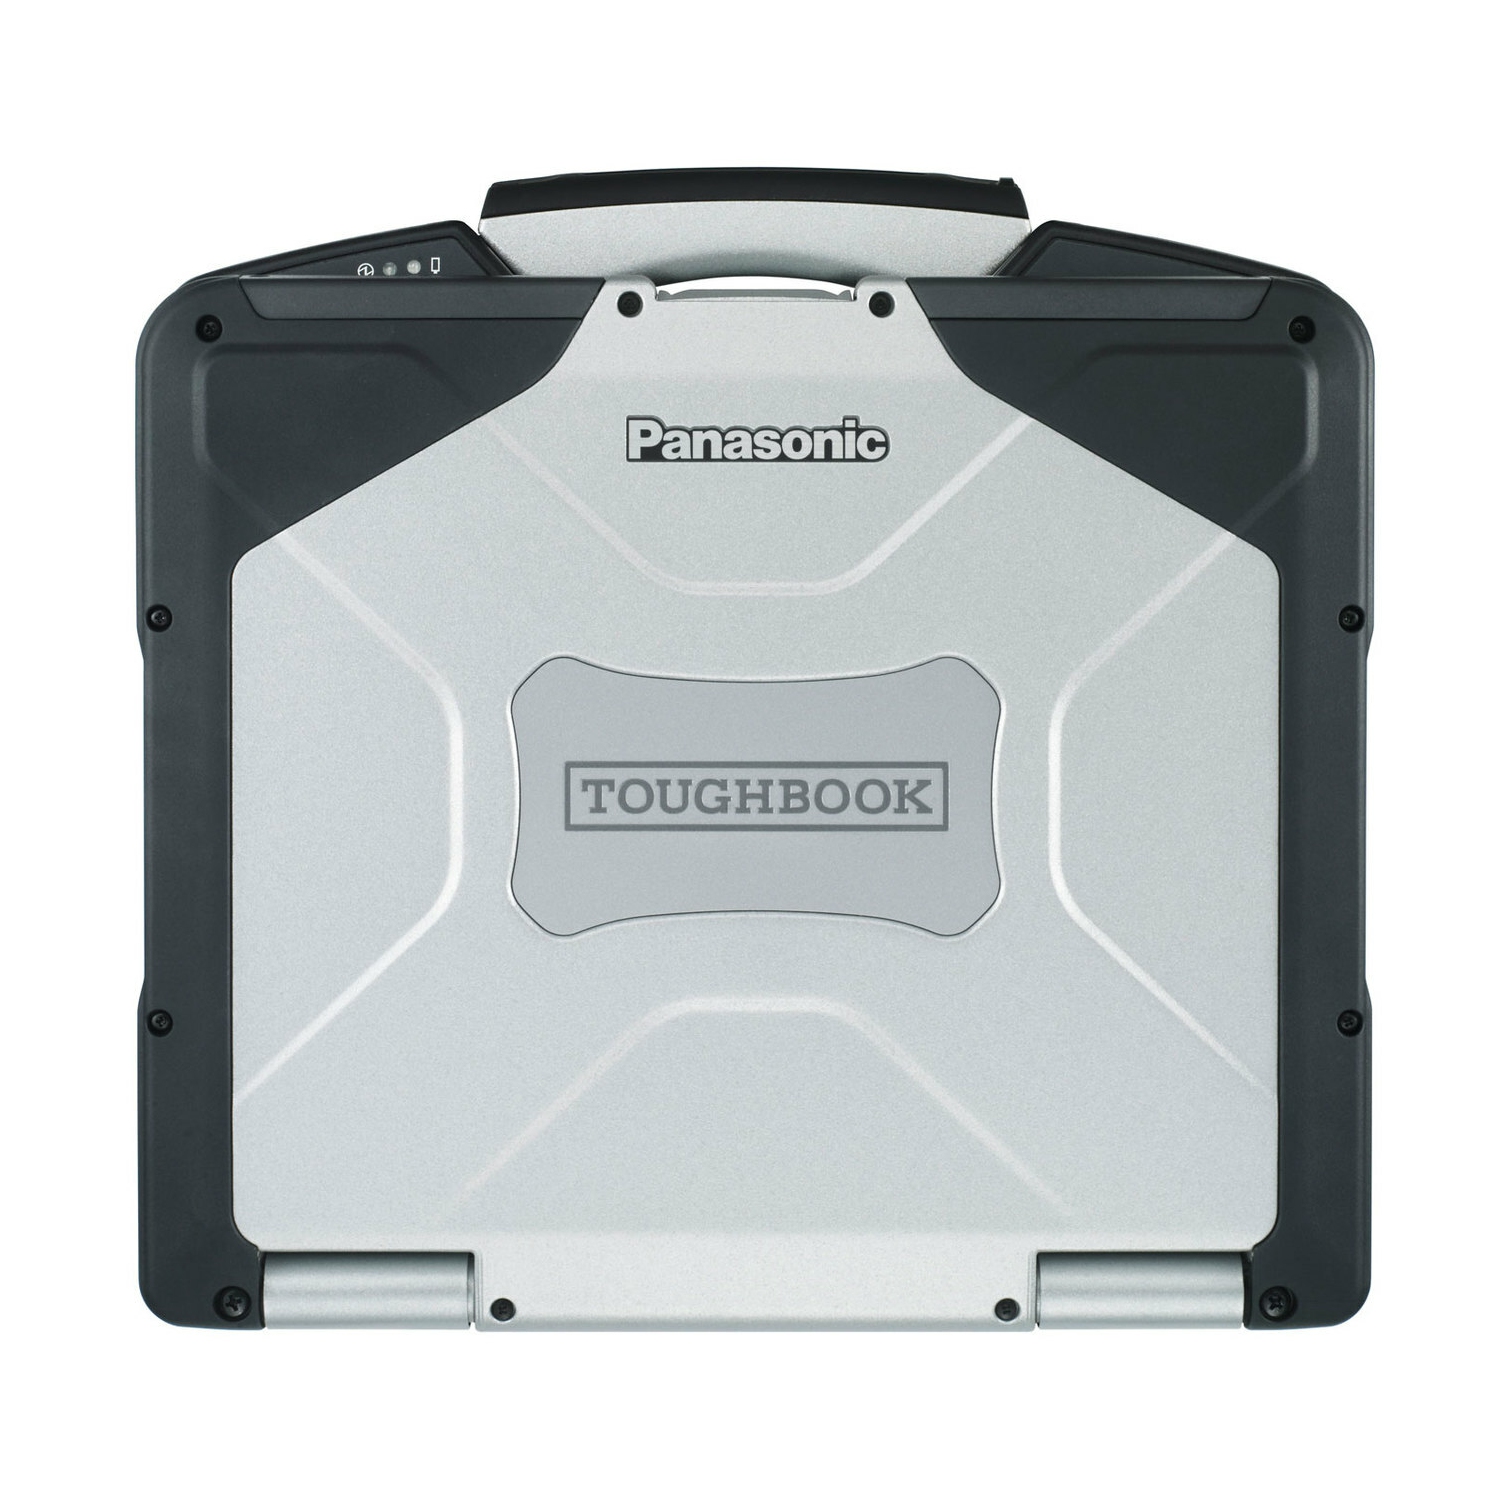 Refurbished (Excellent) - Upgraded Panasonic Toughbook CF-31 MK3 Fully Rugged 2.6GHz Intel Core i5, Loaded - Grade A